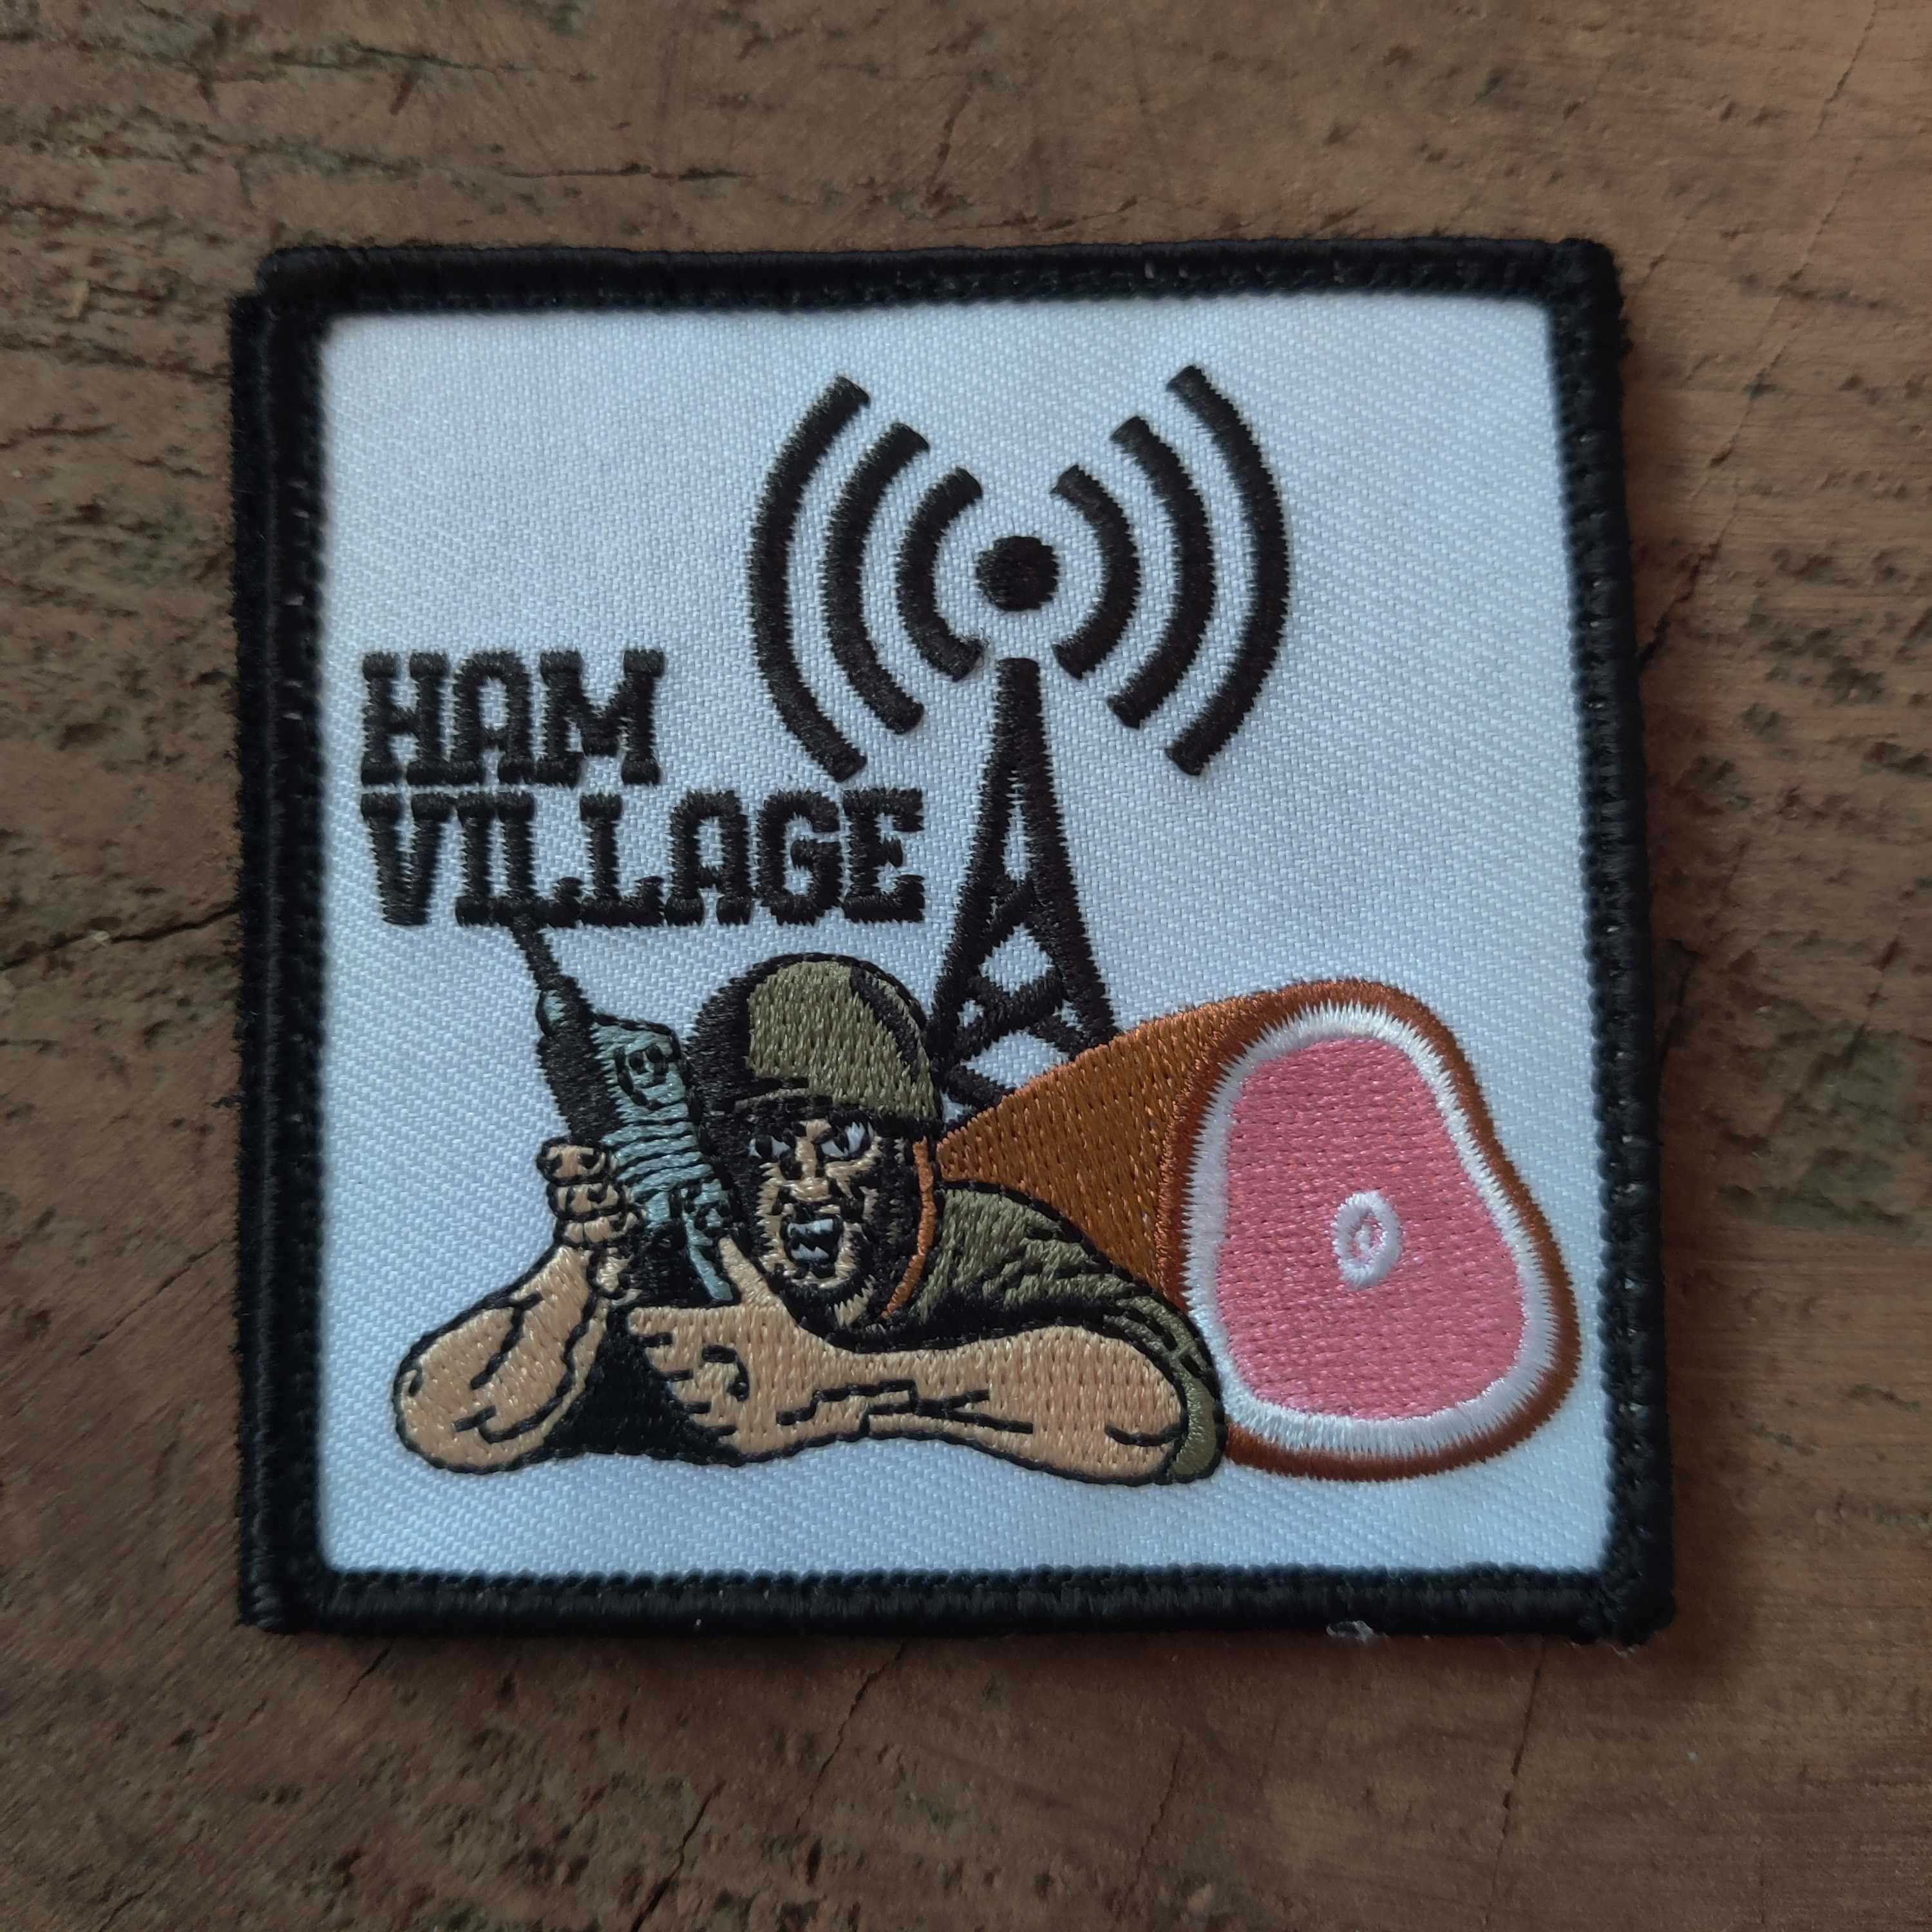 The cool HAM Village patch I acquired after completing my HAM radio technicians license exam.